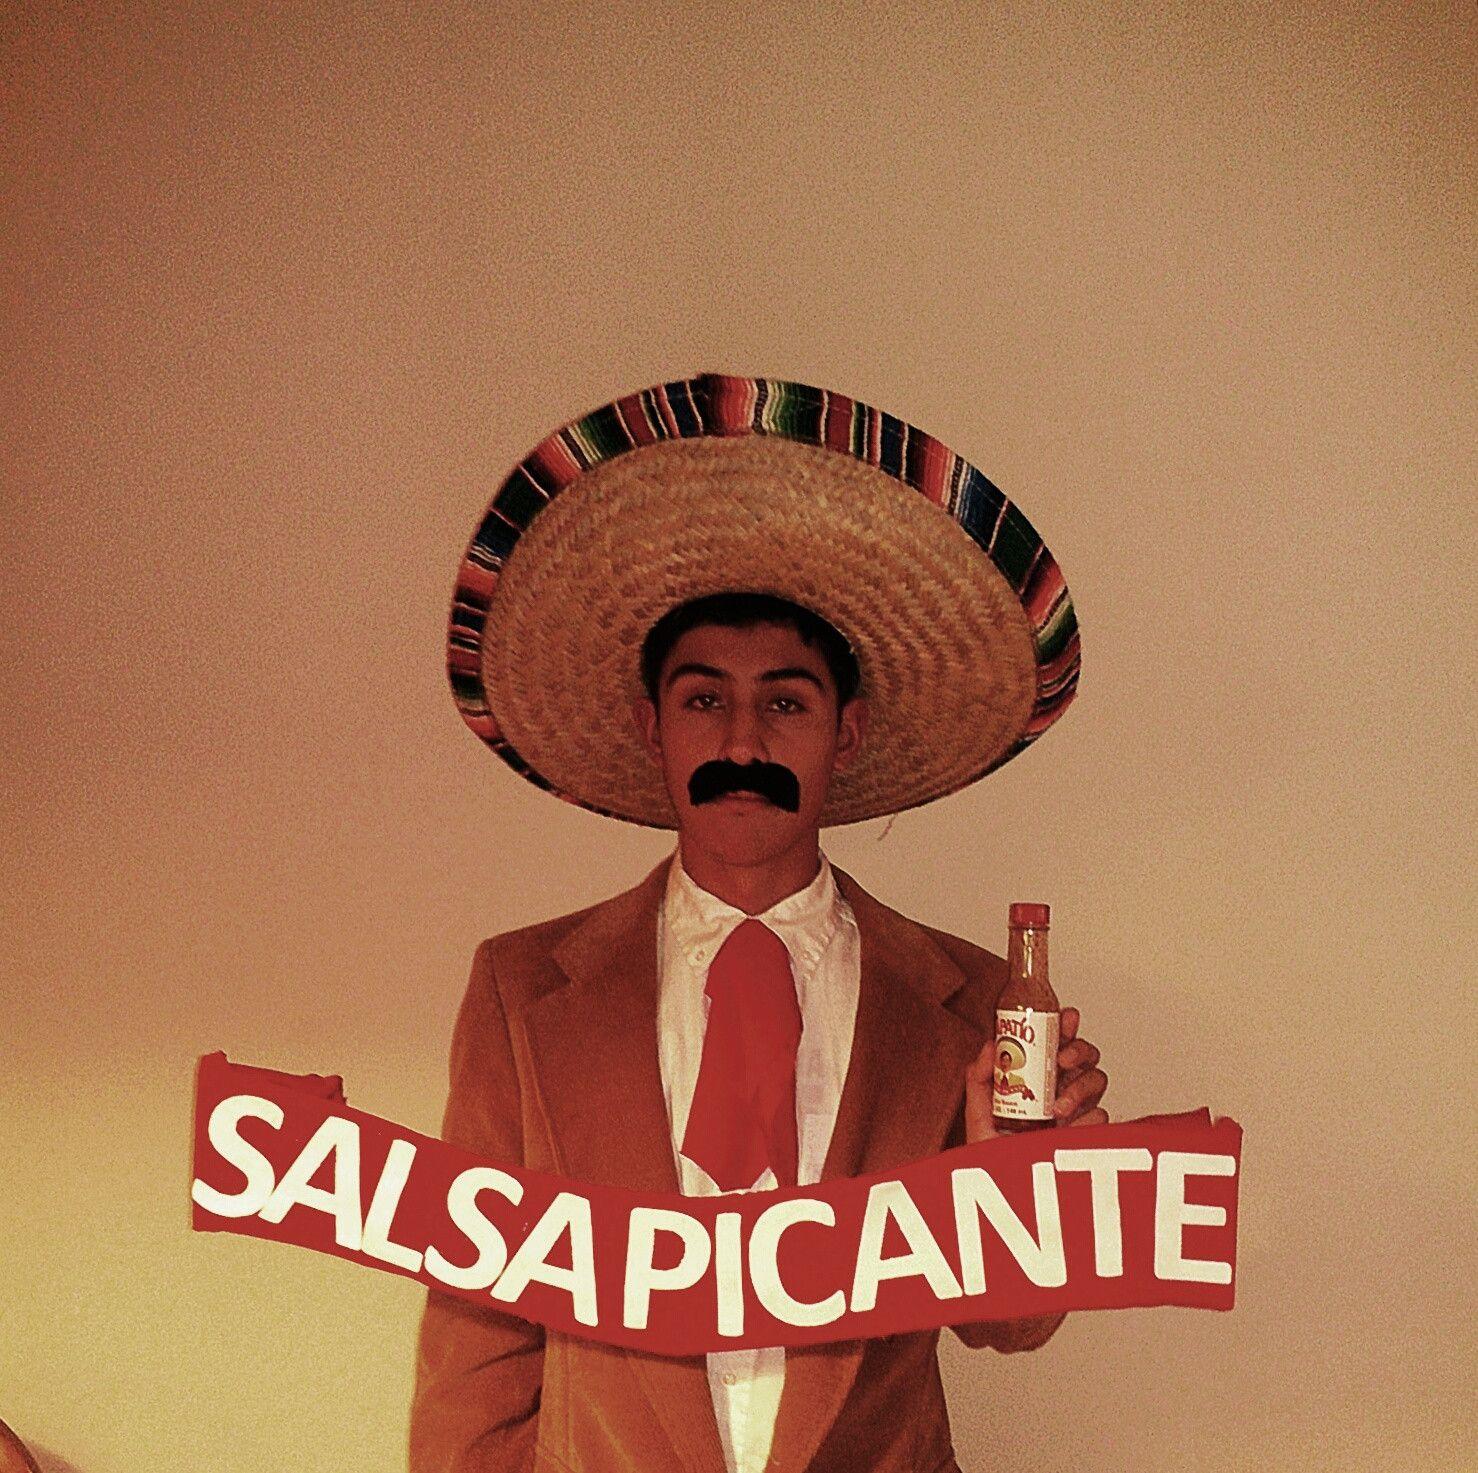 Tapatio Logo - I was the Tapatio guy for Halloween